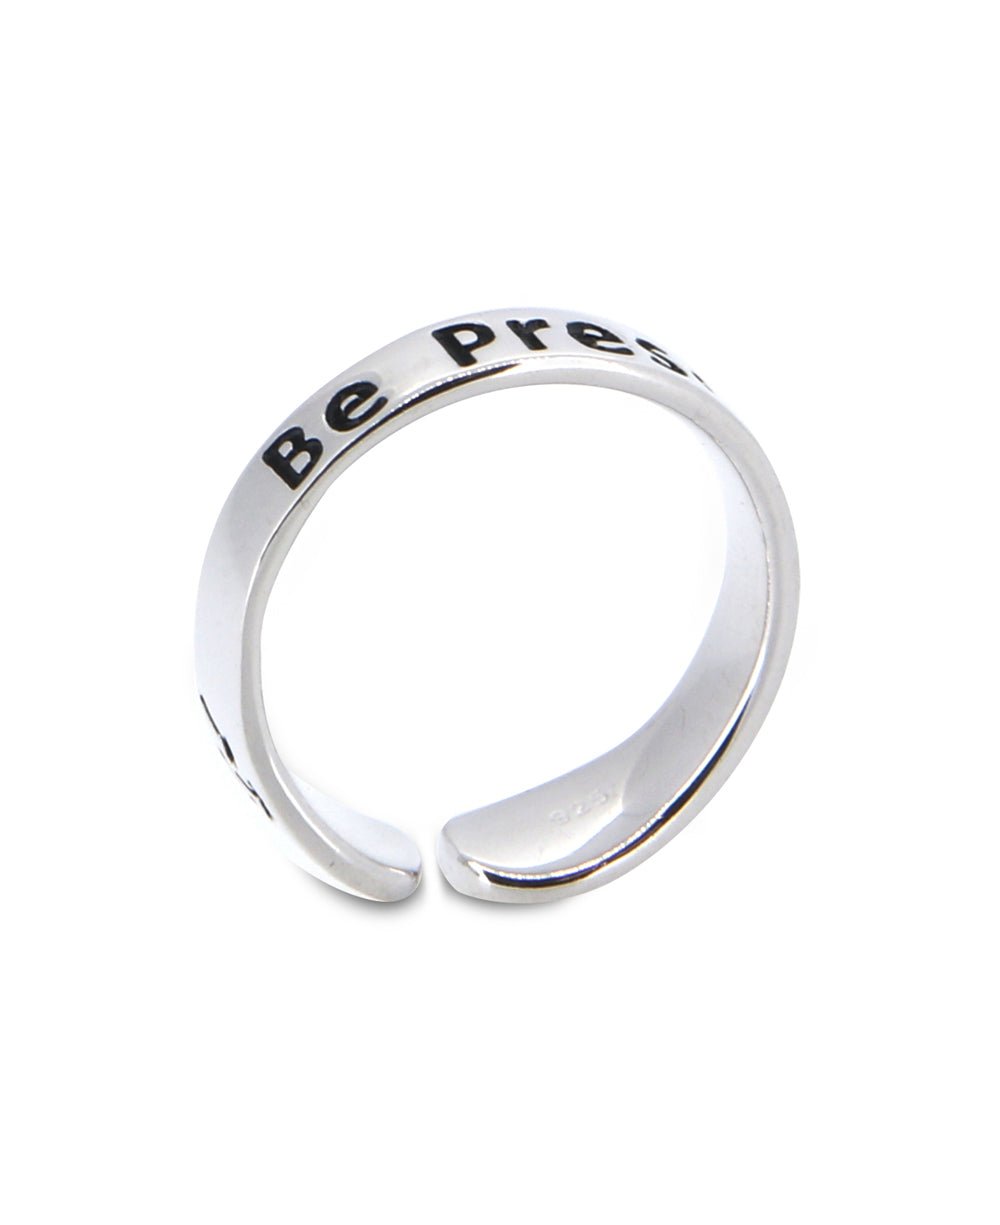 Be Present Inspirational Adjustable Mantra Ring - Rings